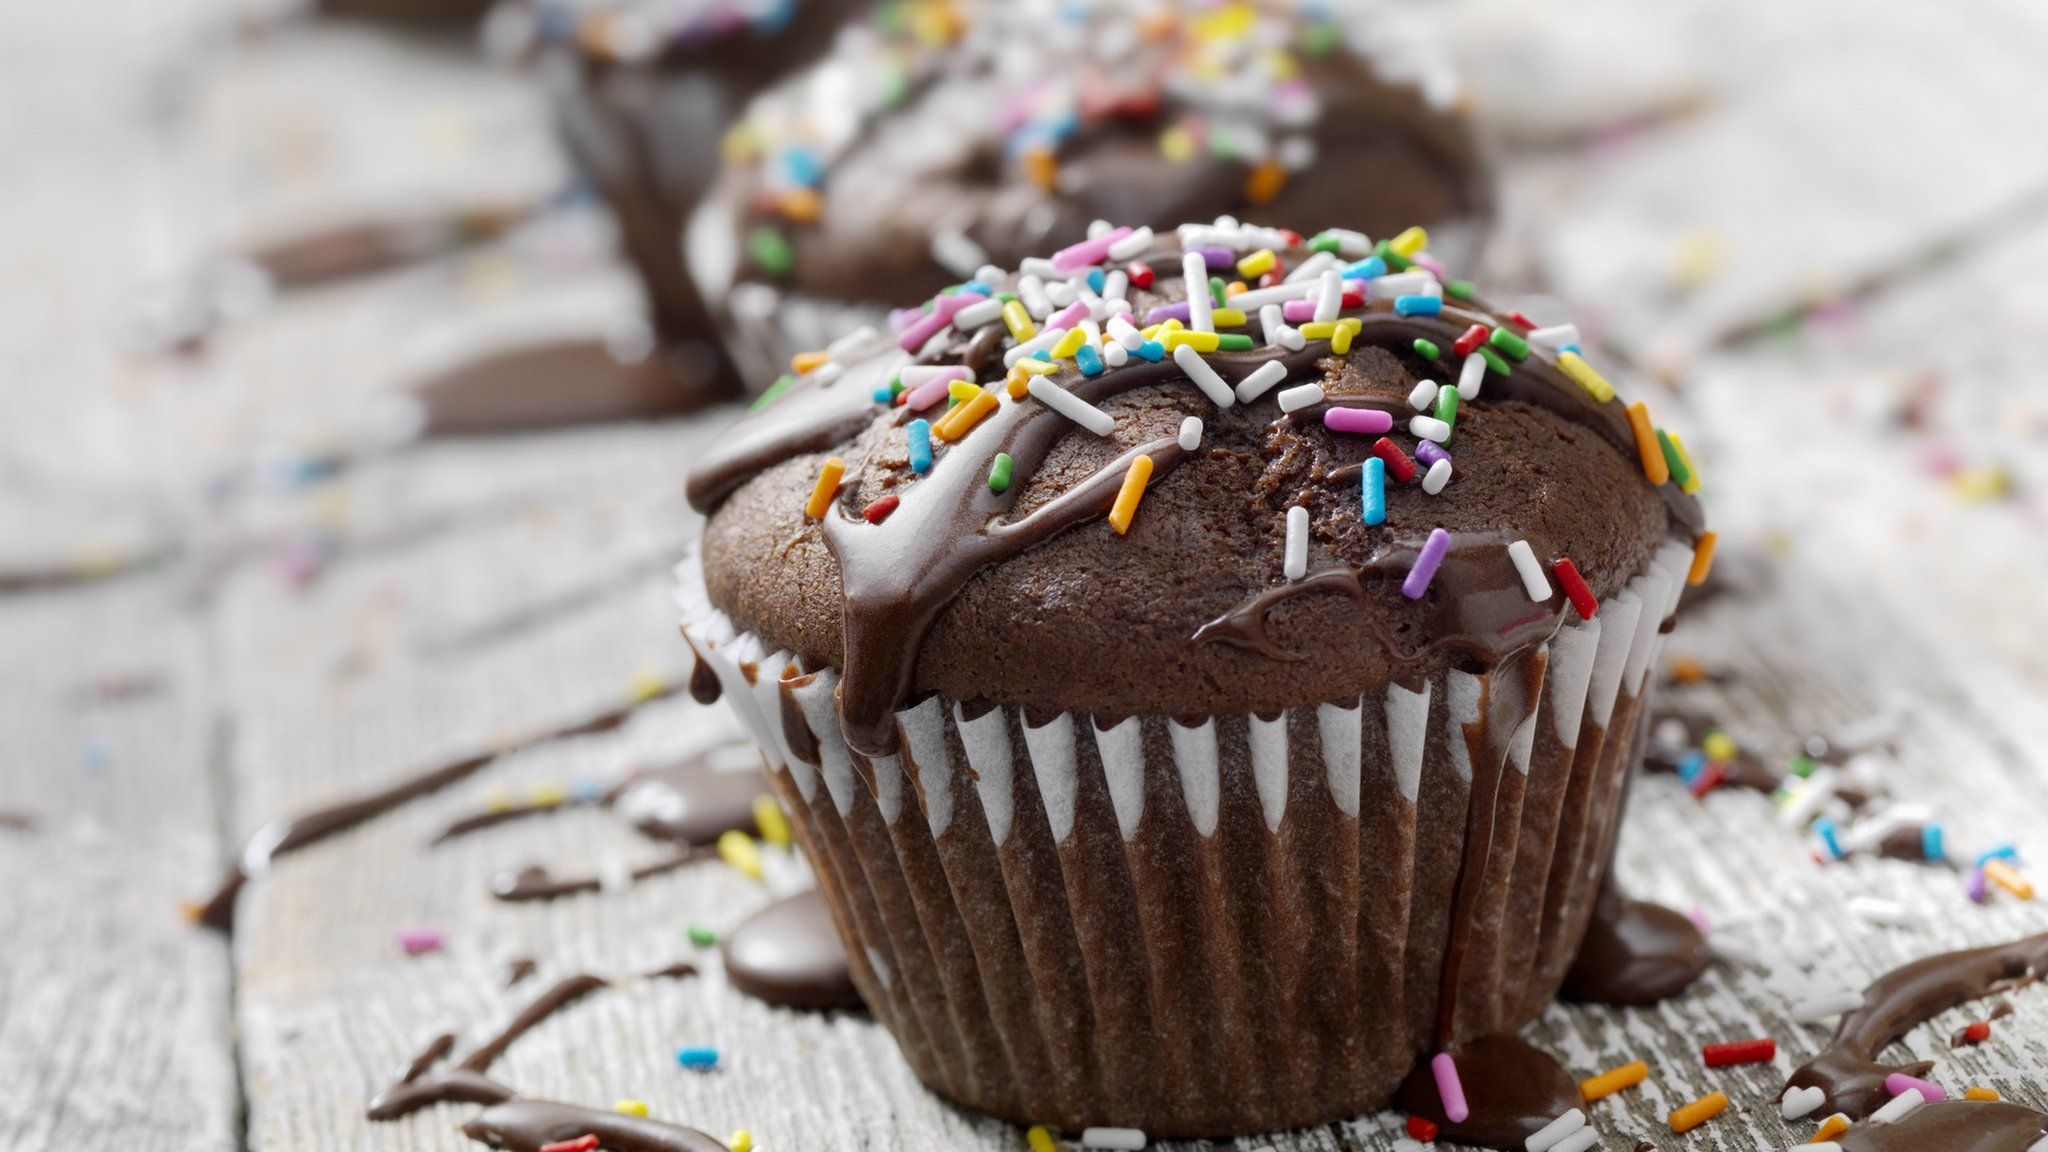 A stock image of a chocolate cupcake